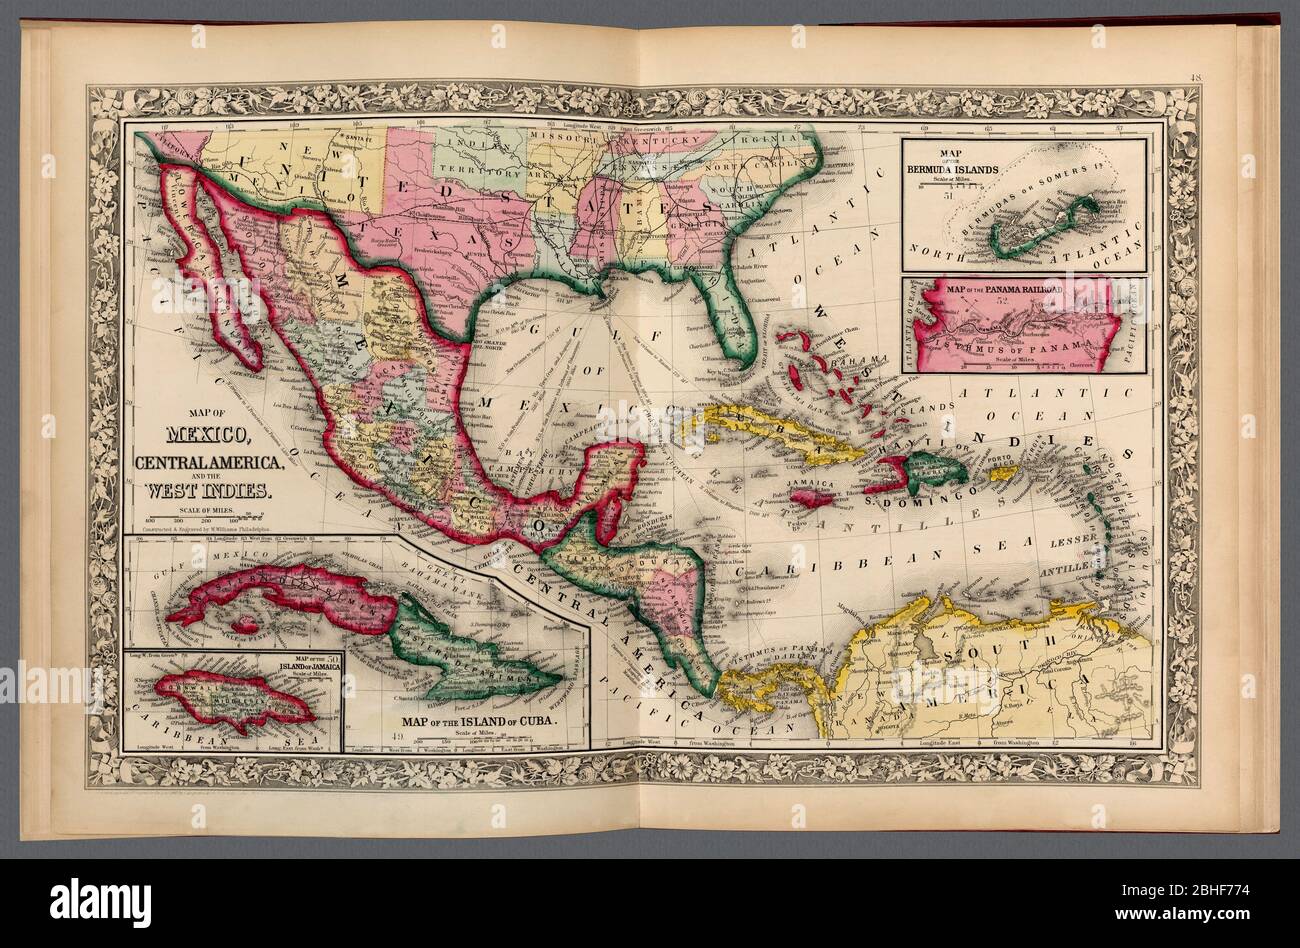 Map of Mexico, Central America, the West Indies, Cuba; Jamaica; Bermuda Islands, and a map of the Panama Railroad. A restored historic map reproduction. Shows map within open atlas. Stock Photo